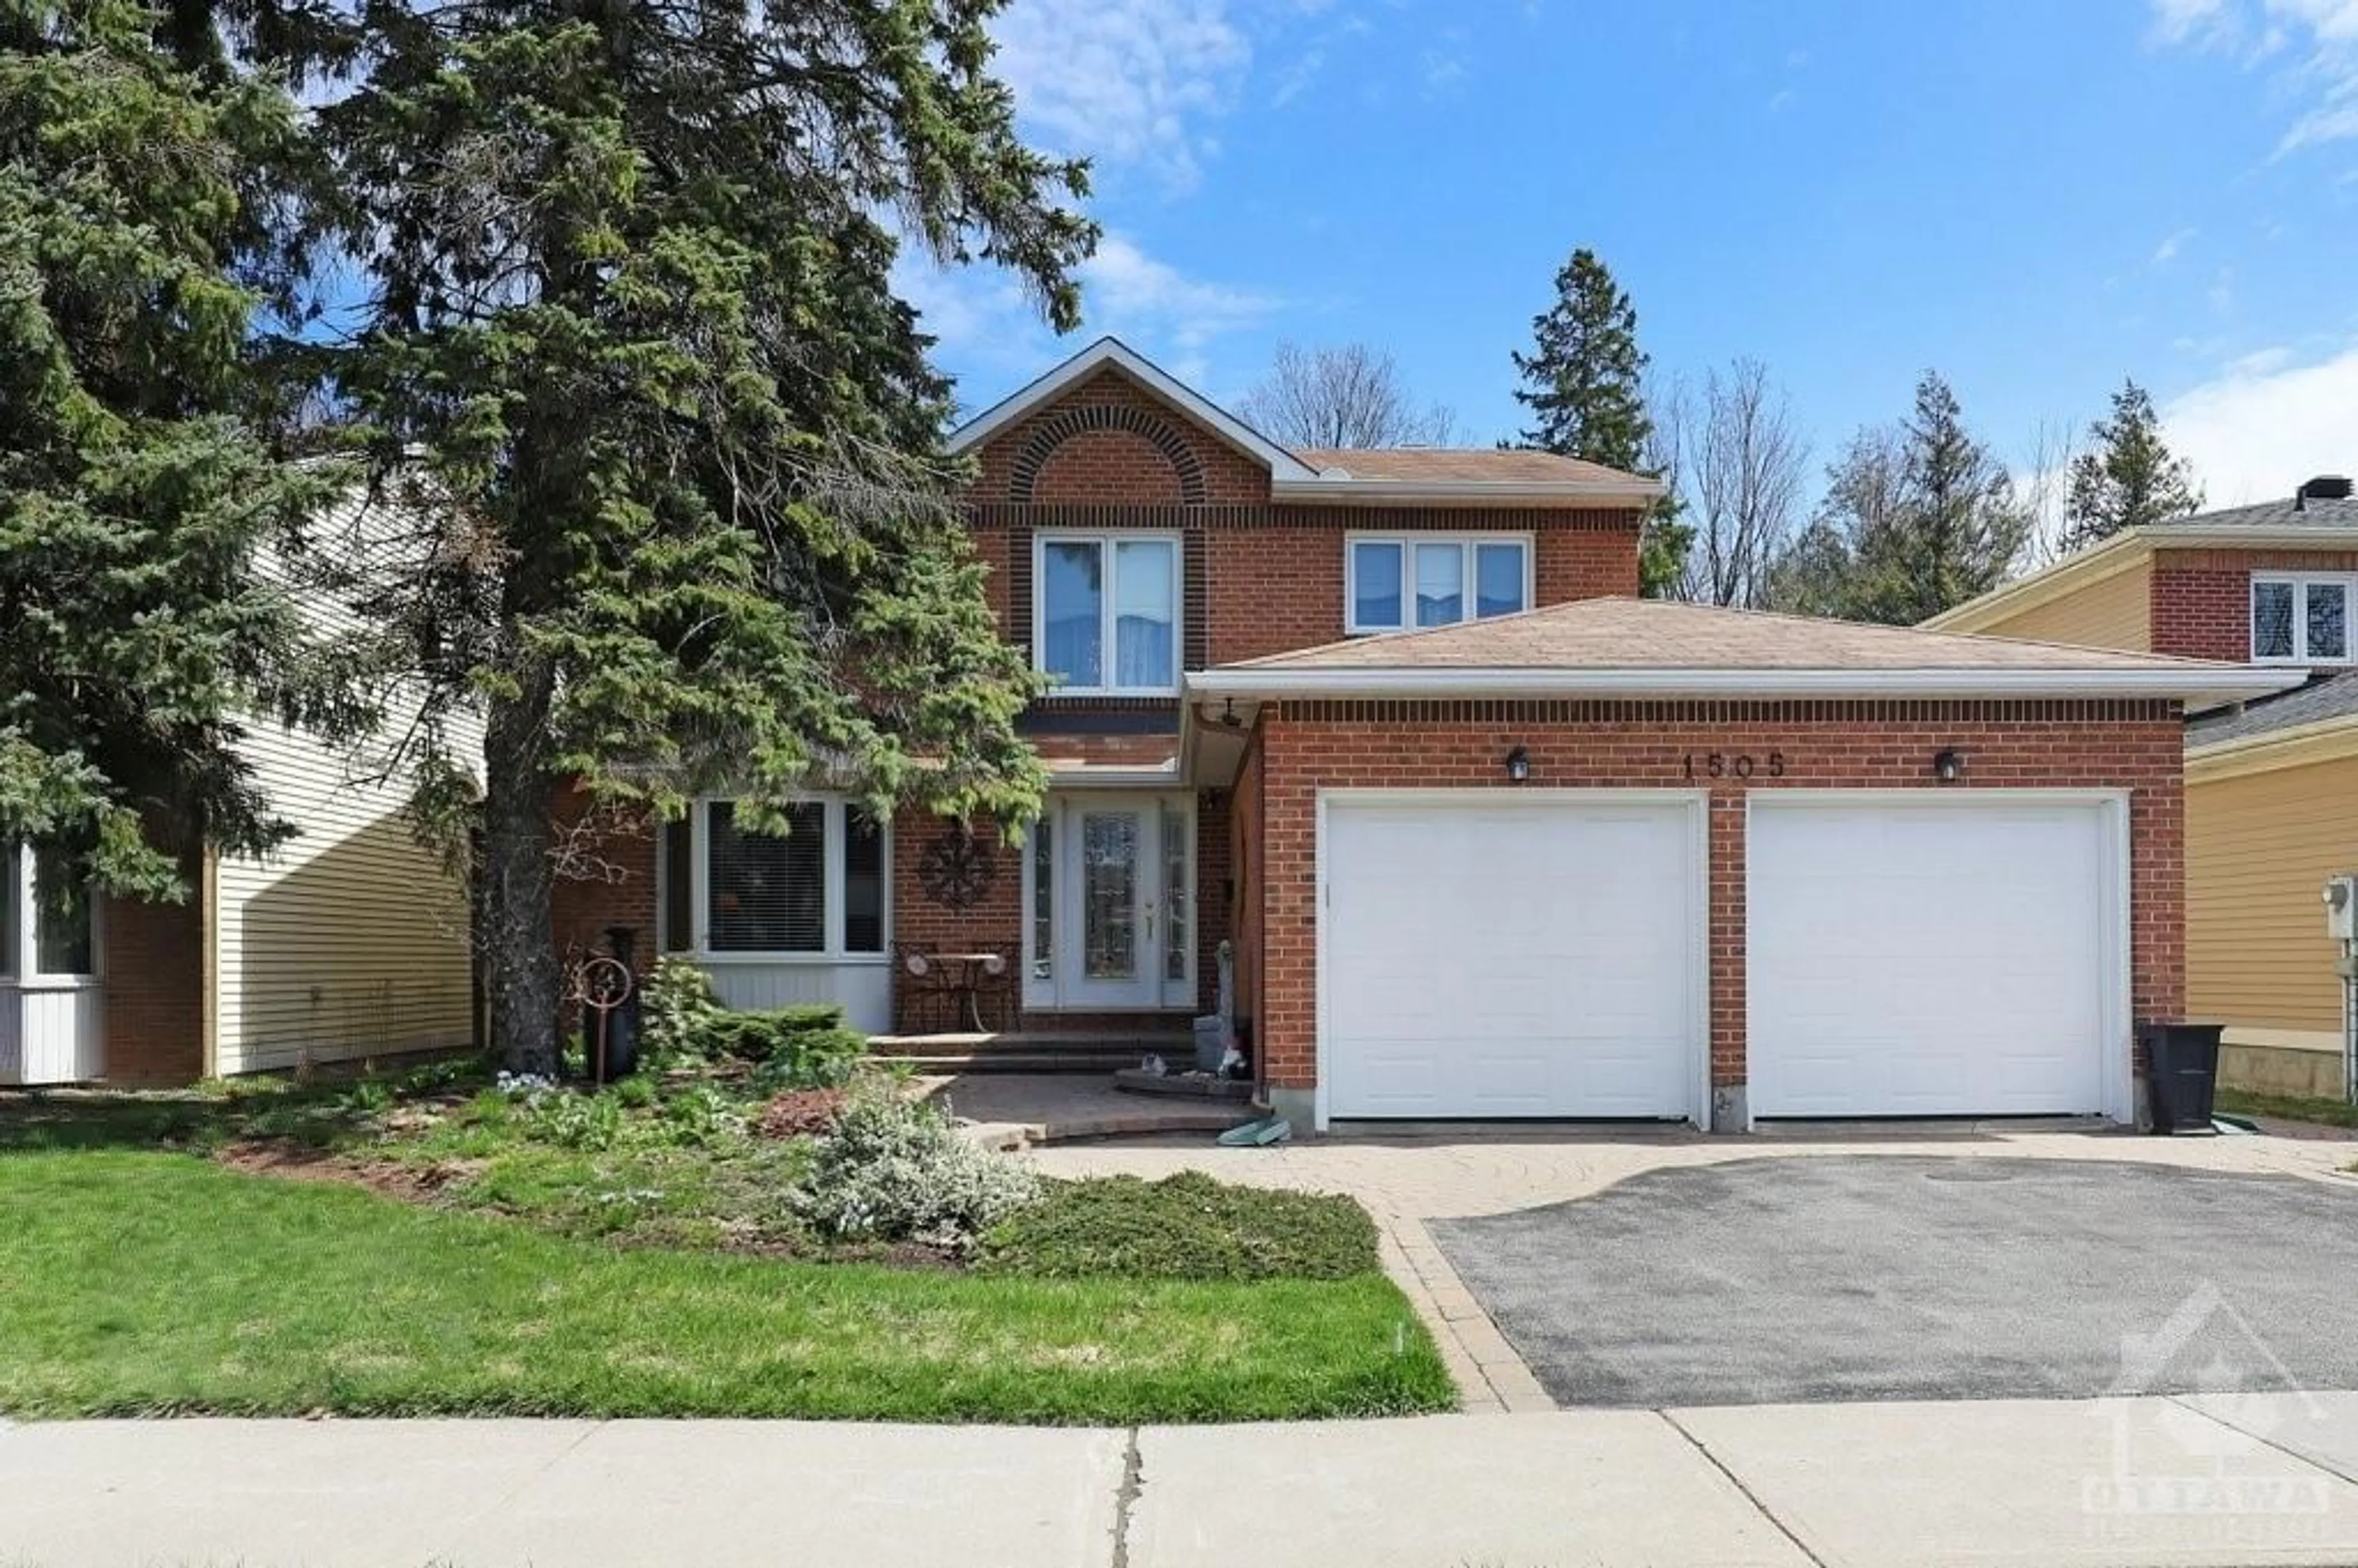 Home with brick exterior material for 1505 FOREST VALLEY Dr, Ottawa Ontario K1C 5R5